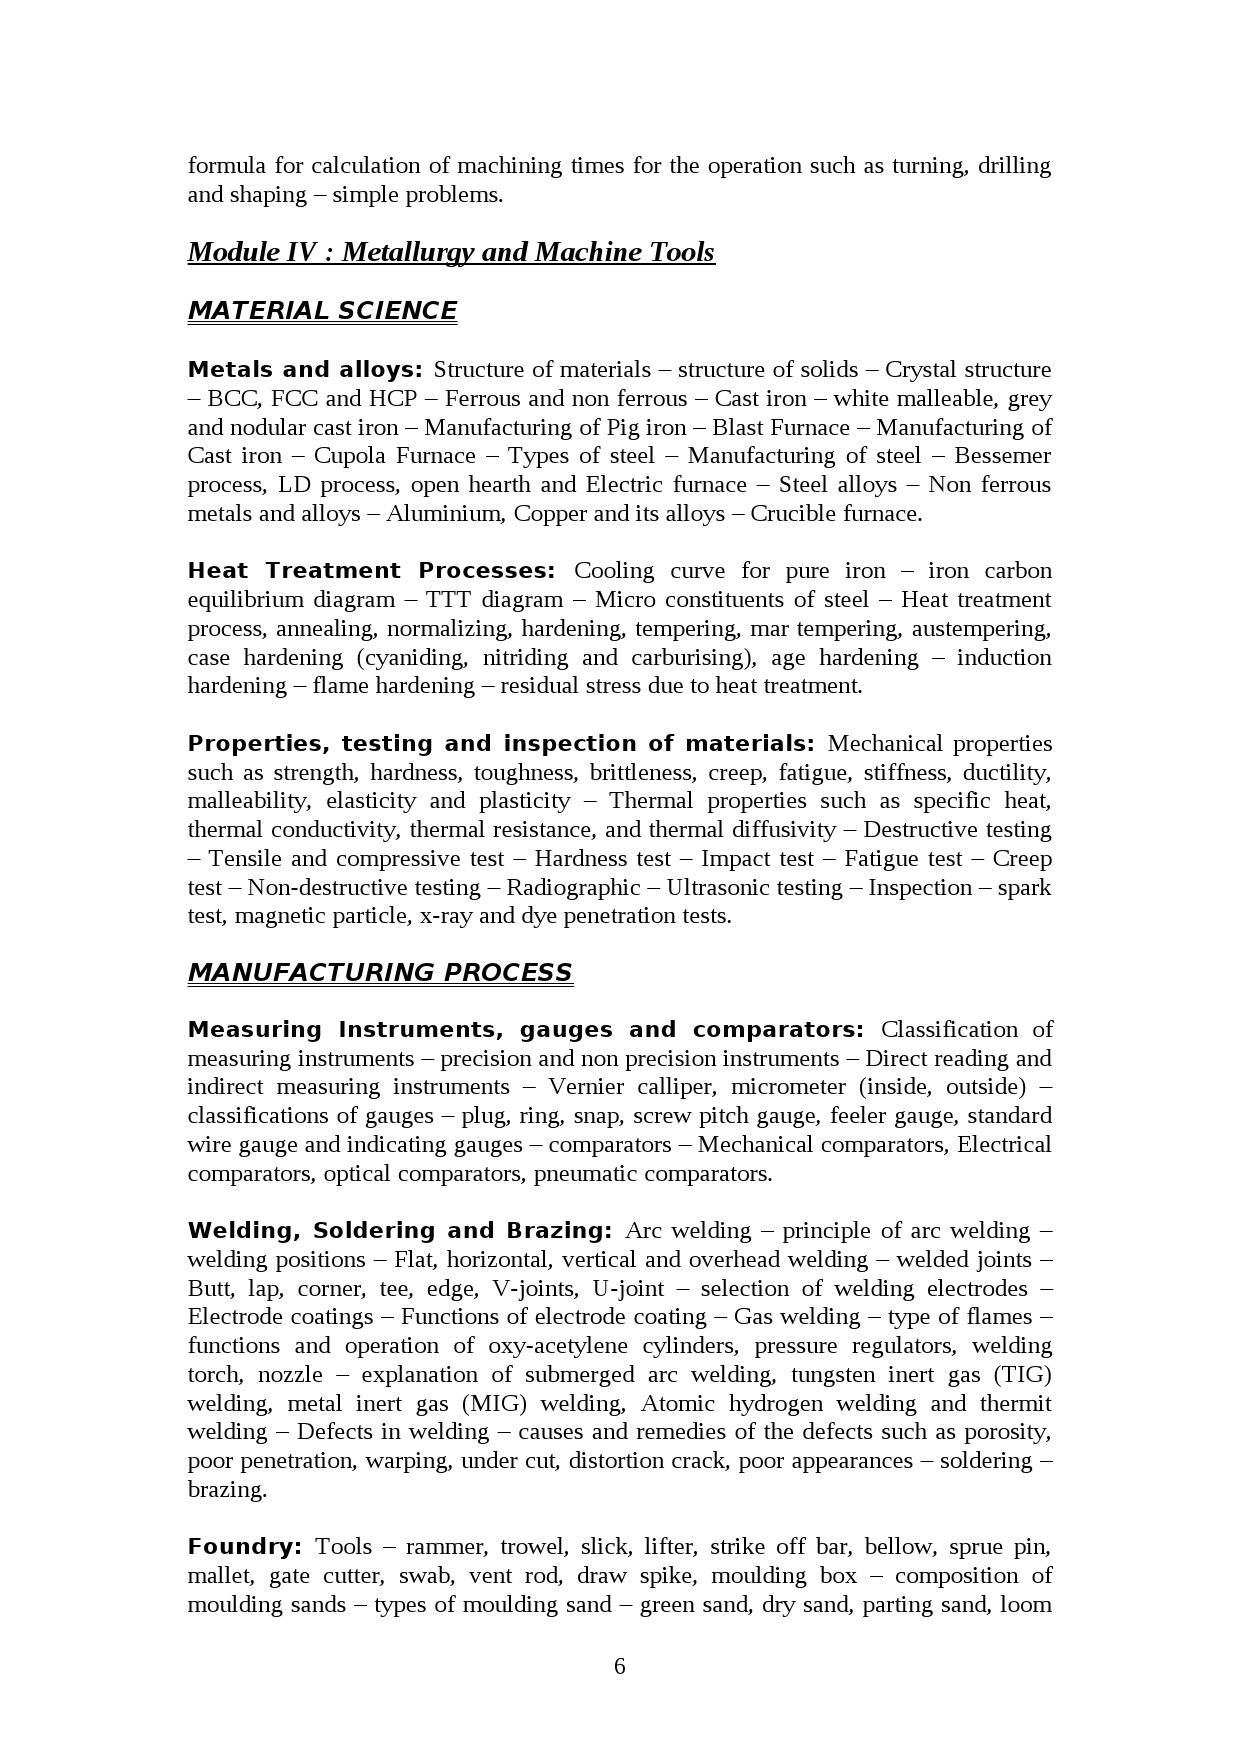 Mechanical Engineering Lecturer in Polytechnic Exam Syllabus - Notification Image 6